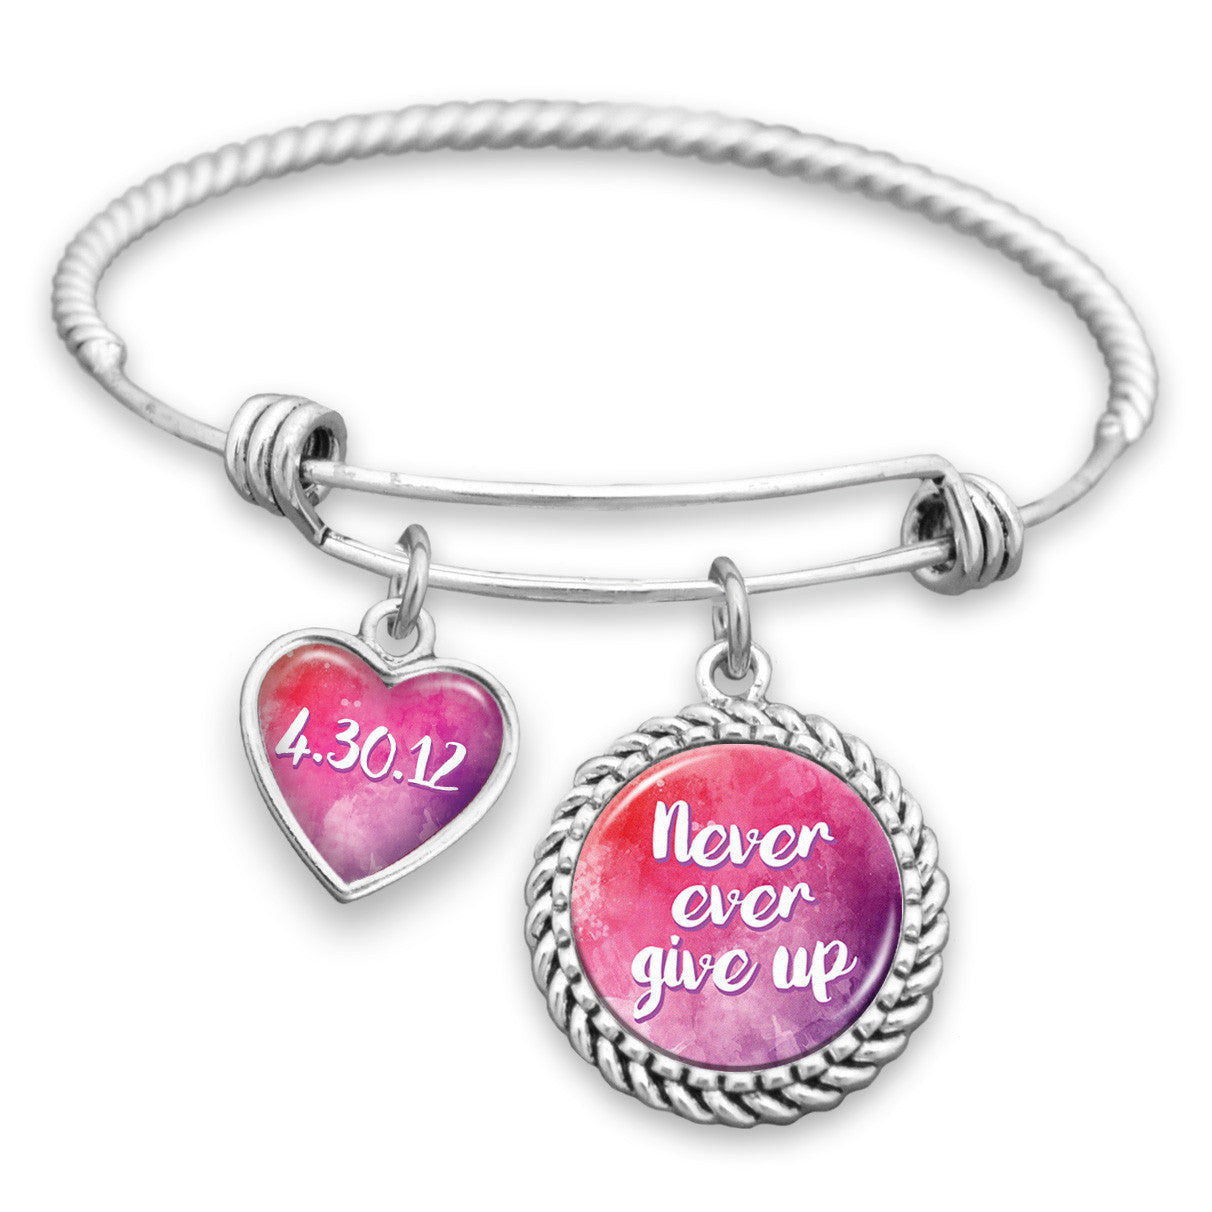 Never Ever Give Up Personalized Sobriety Date Charm Bracelet